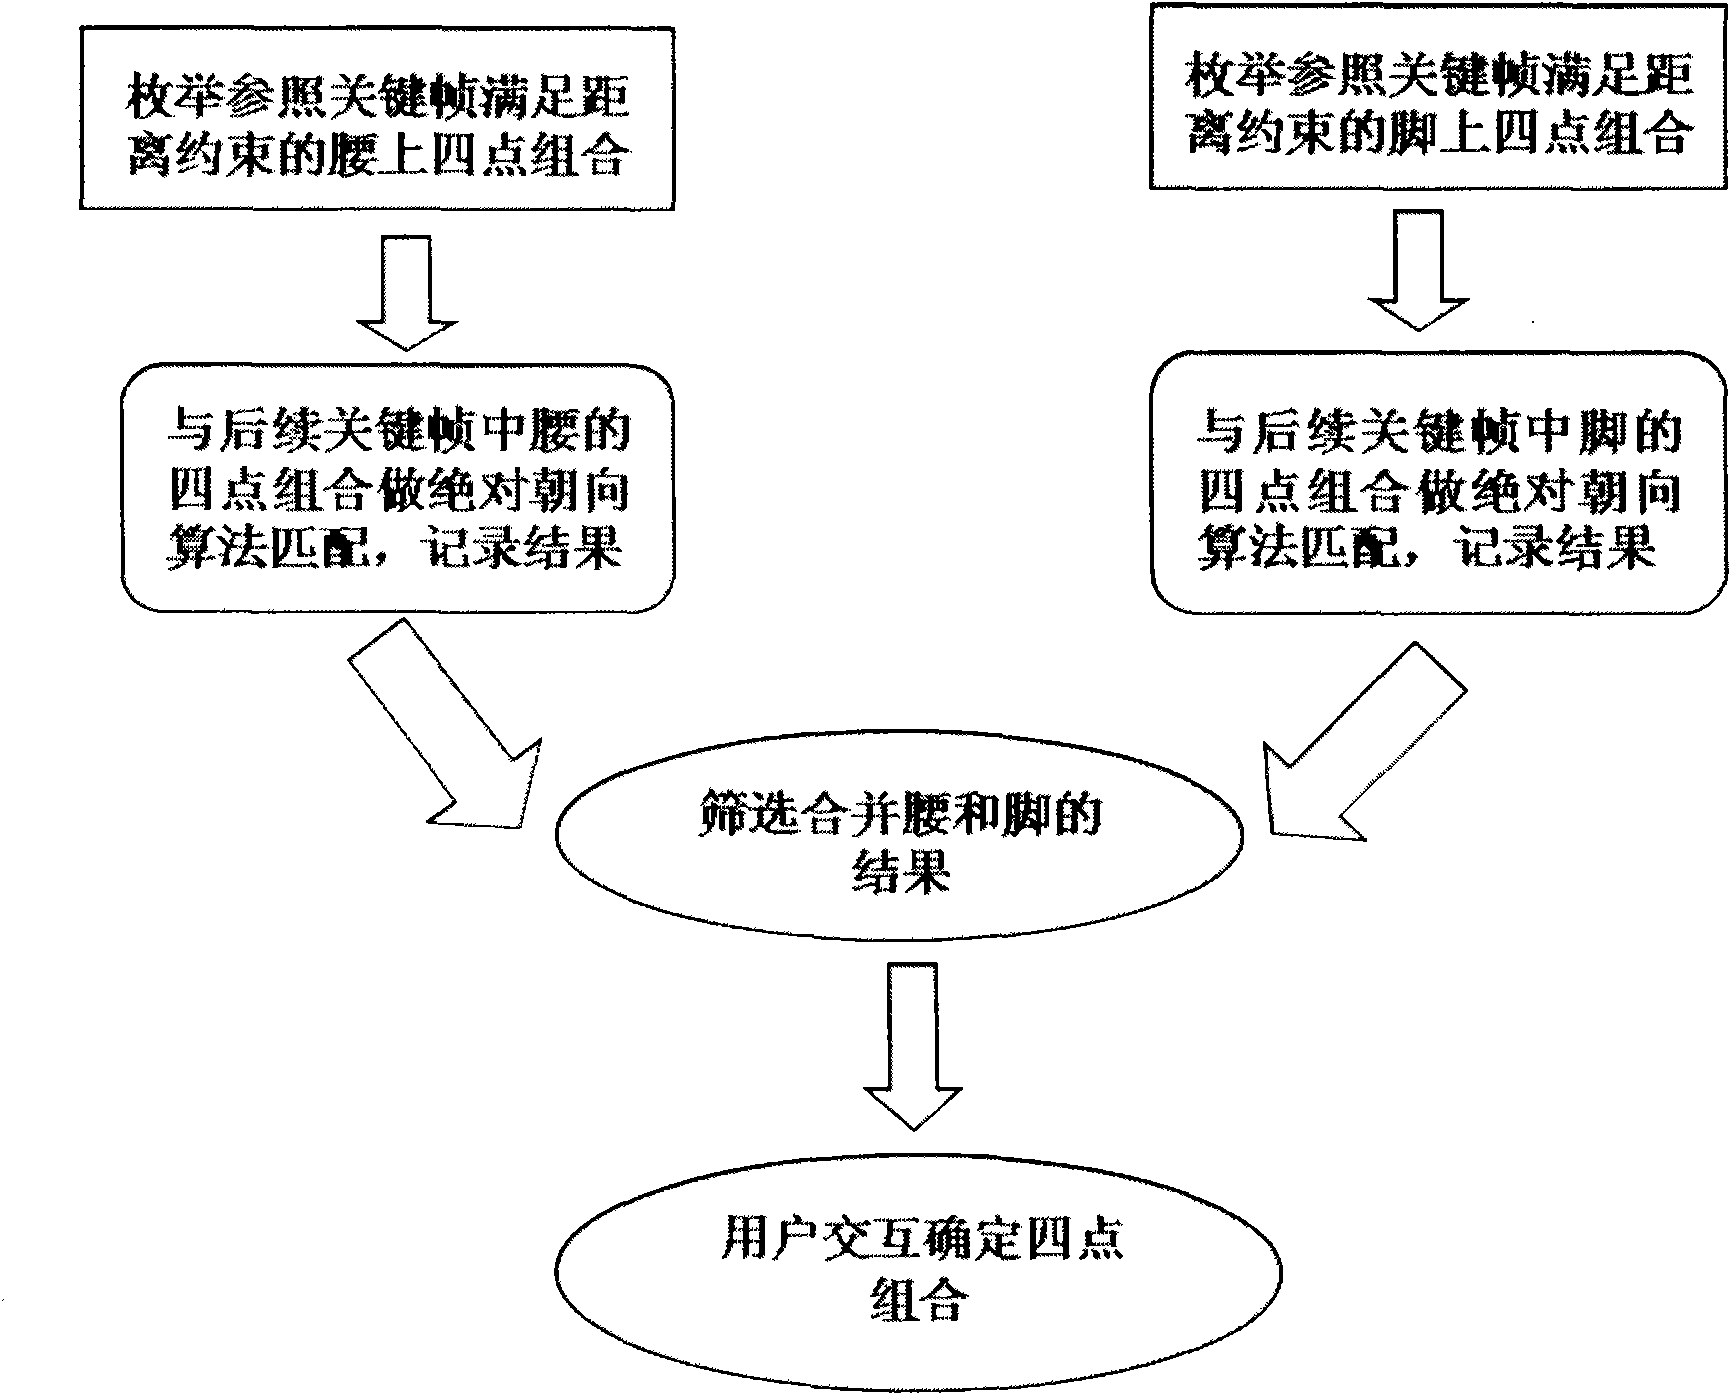 Method and system for realizing human chain structure model